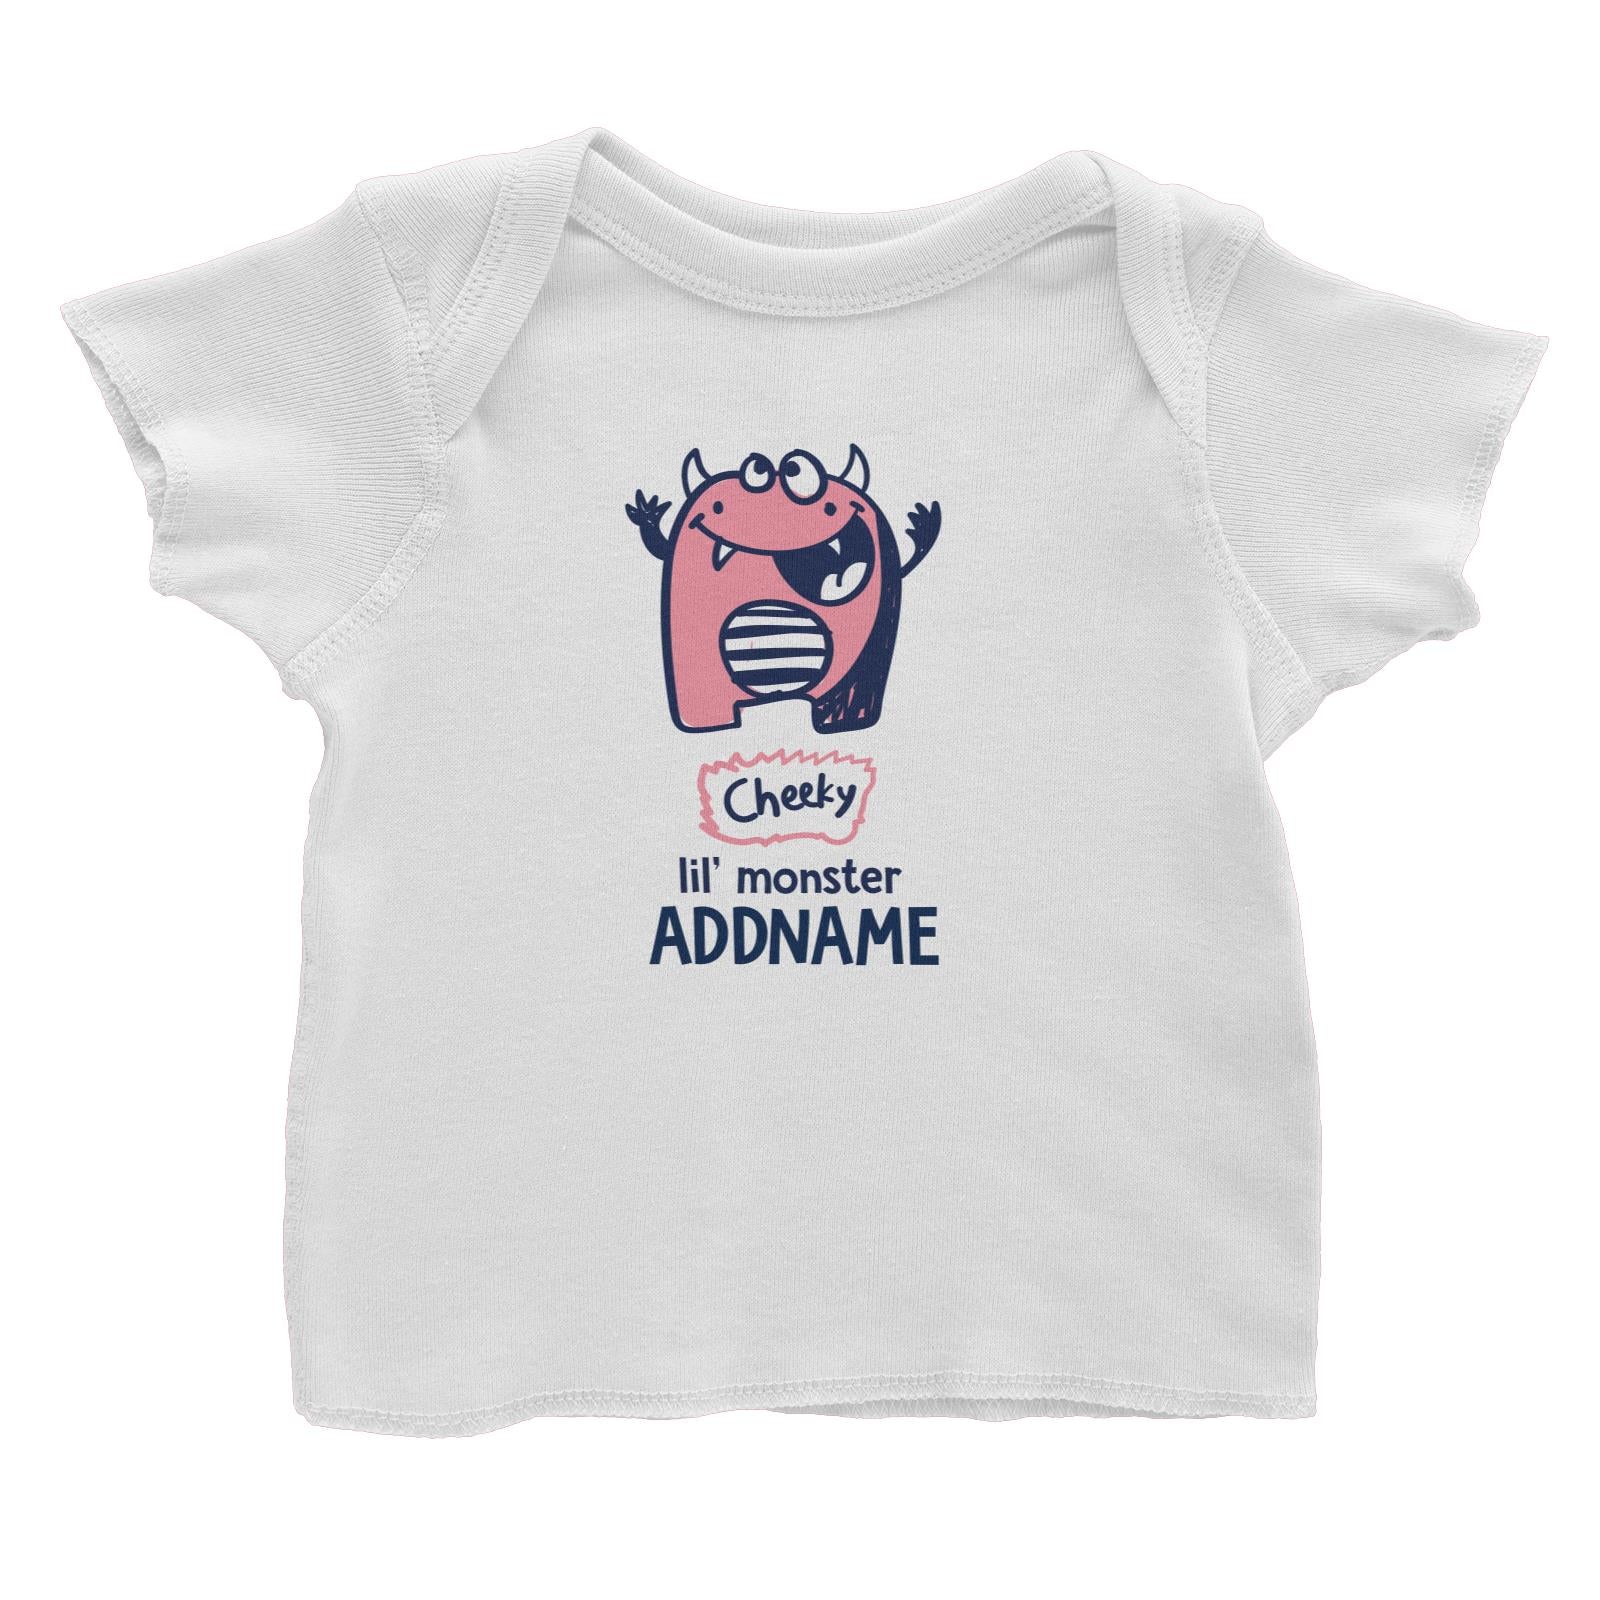 Cool Vibrant Series Cheeky Lil' Monster Addname Baby T-Shirt